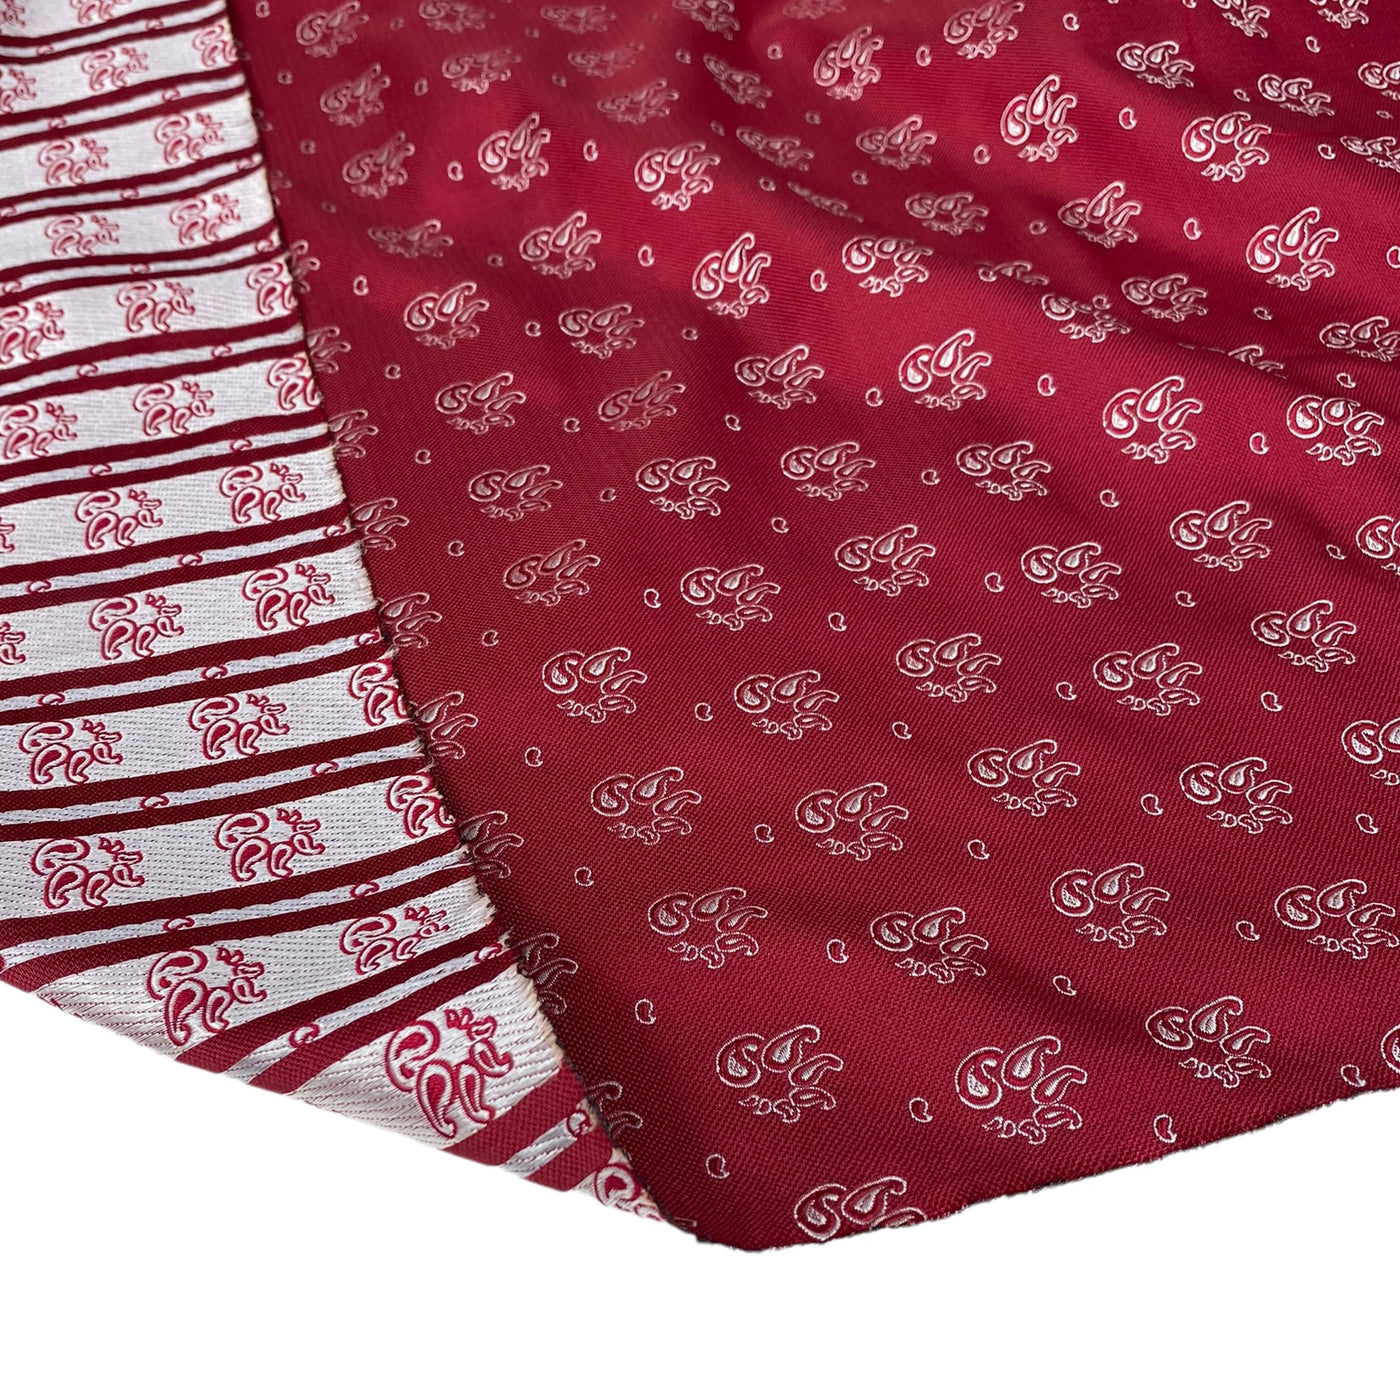 Paisley Polyester Jacquard - Red / White - Remnant